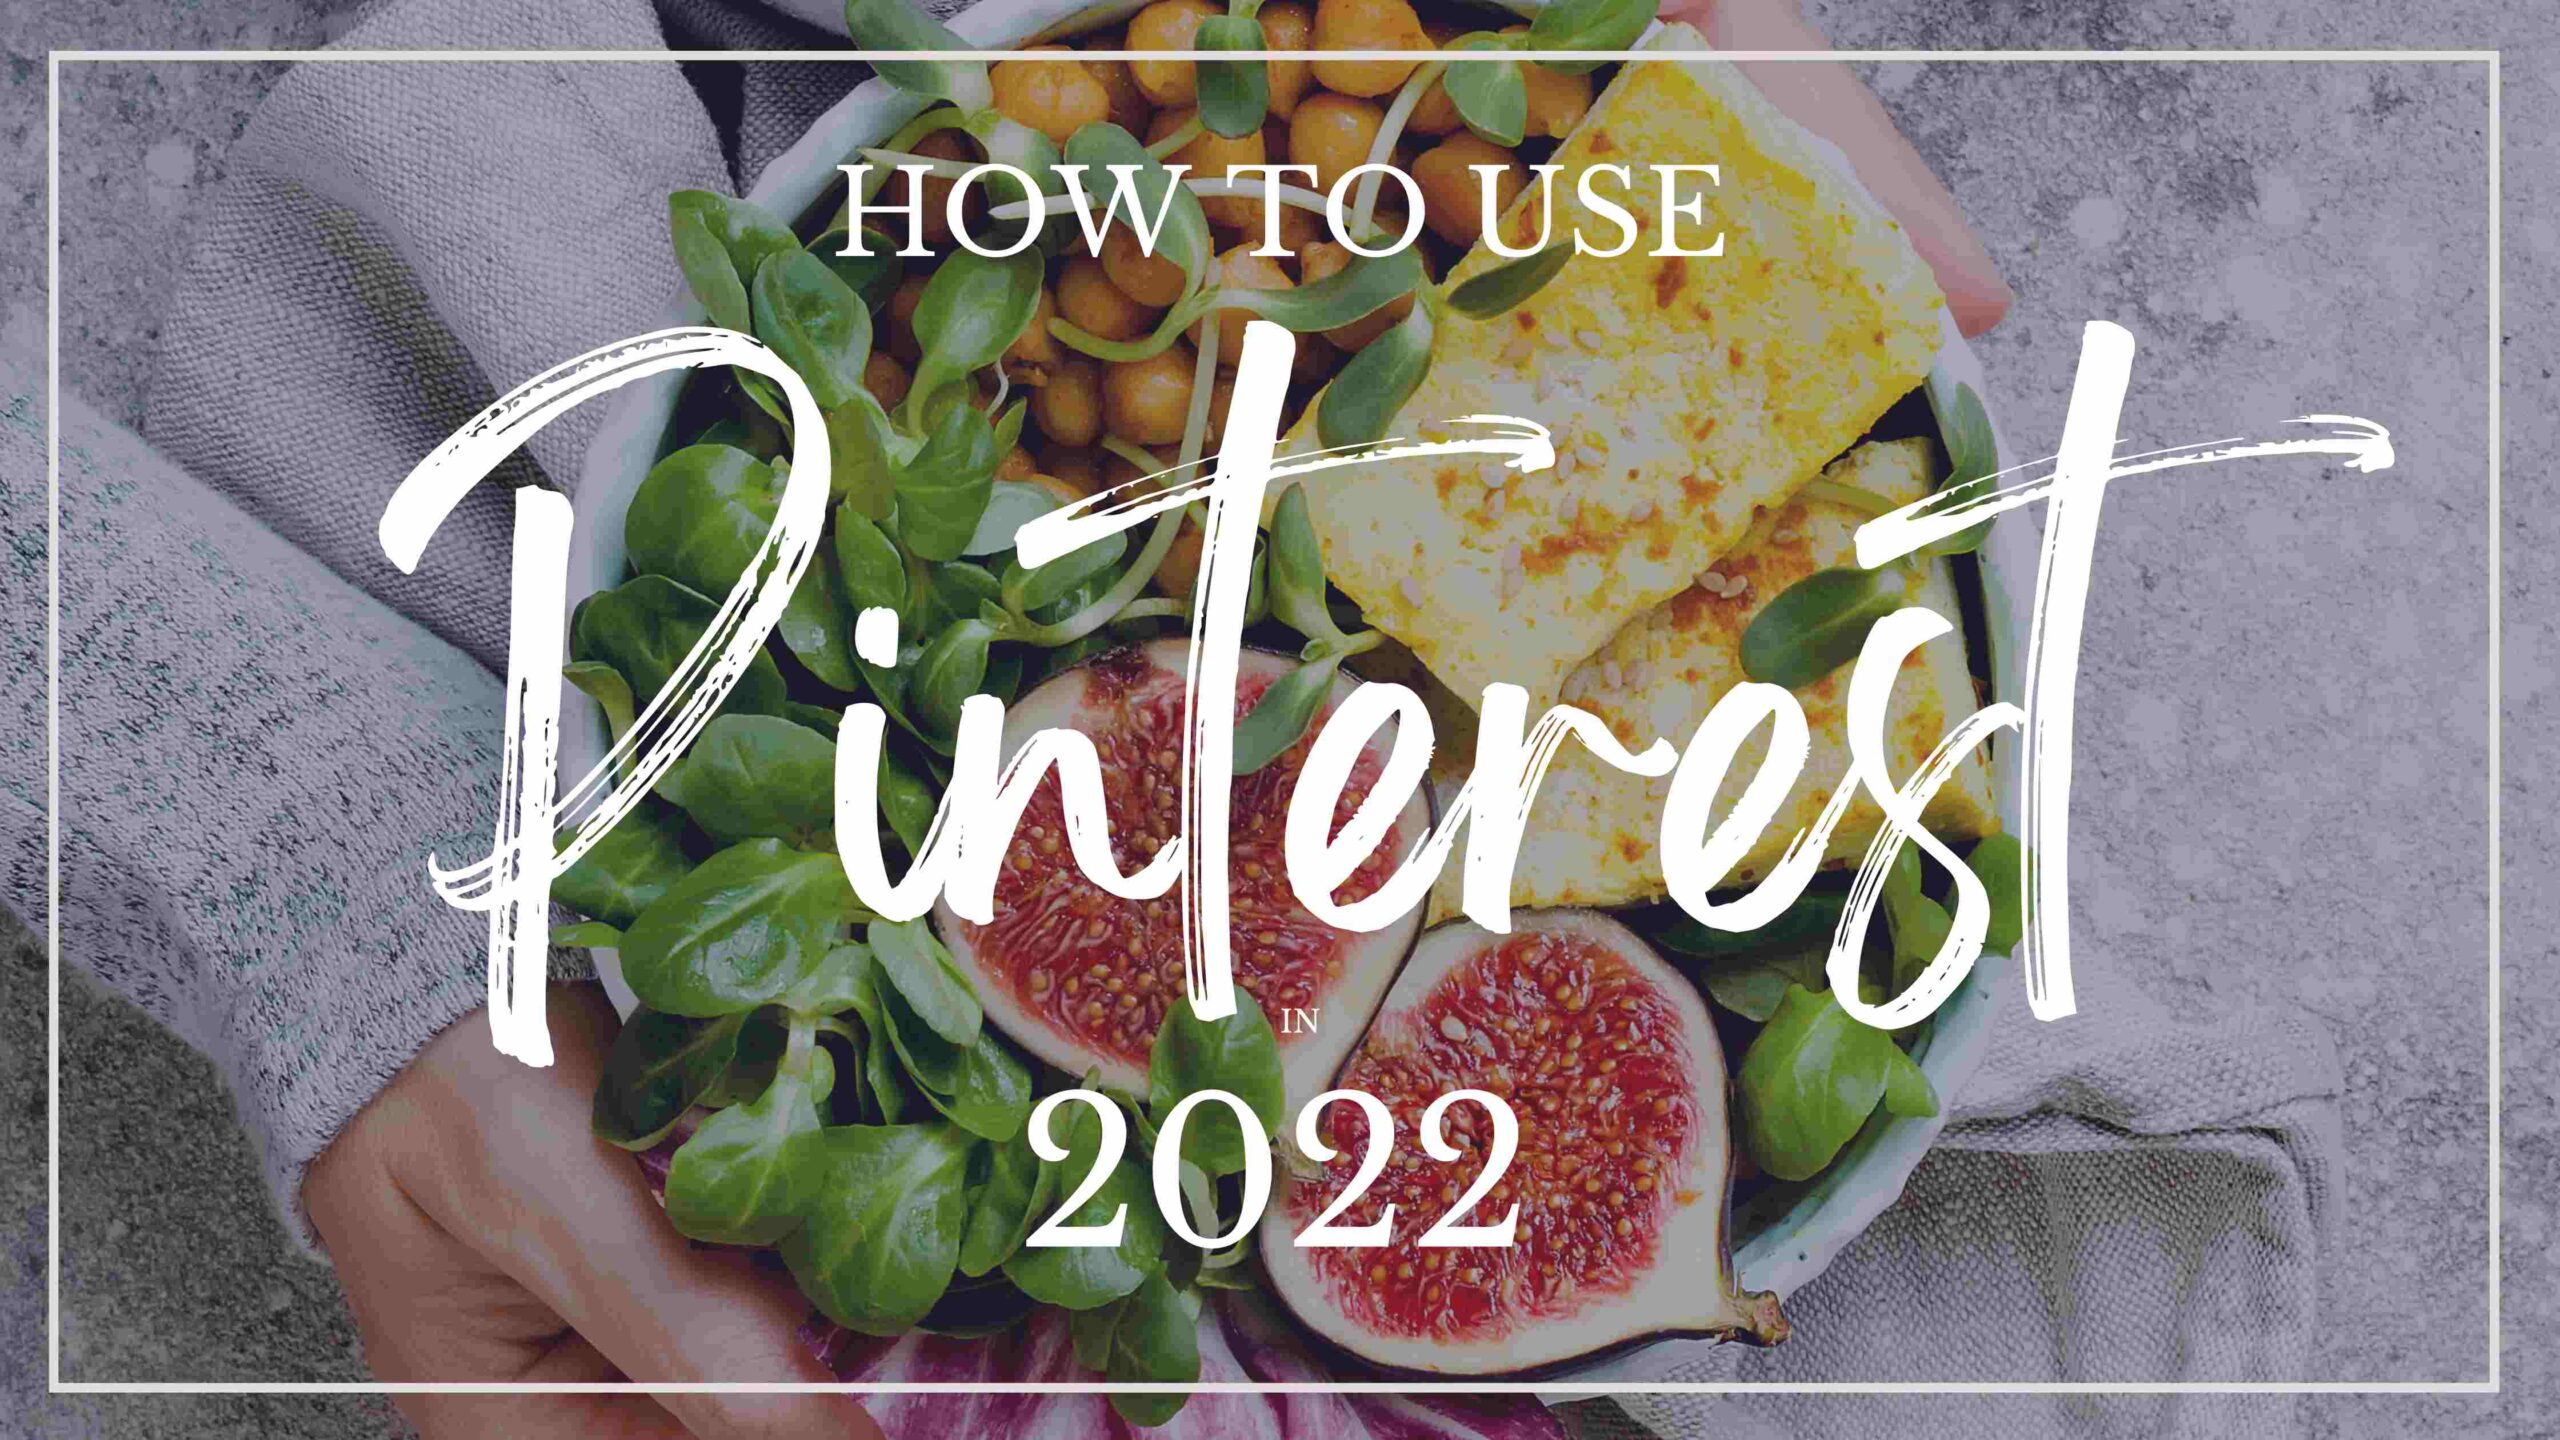 How to Use Pinterest in 2022 banner